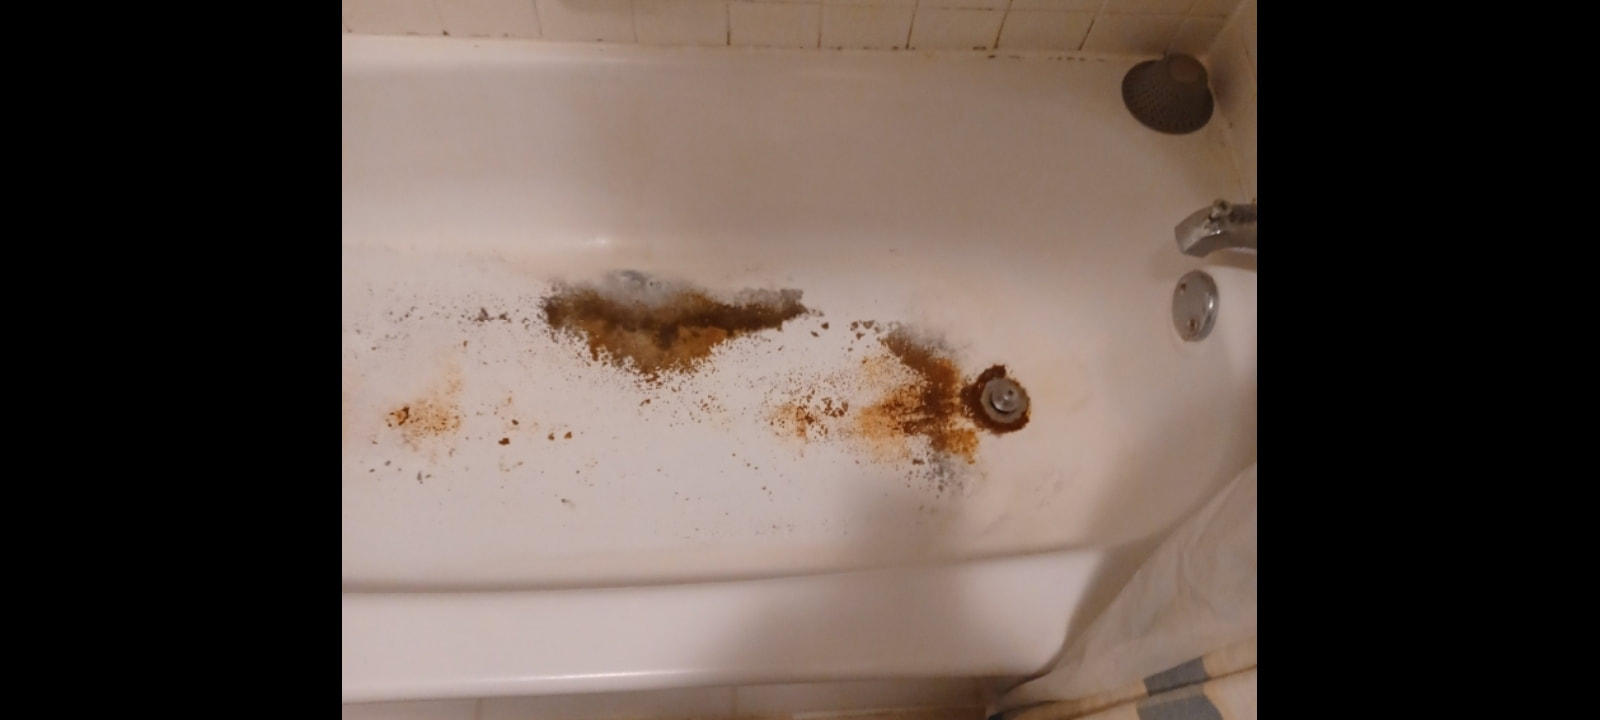 Rust was reversed, then a rust inhibitor was applied after a polyester filler filled in low spots and damaged areas. Before the bathtub could be refinished by Dallas bathtub refinishing services.